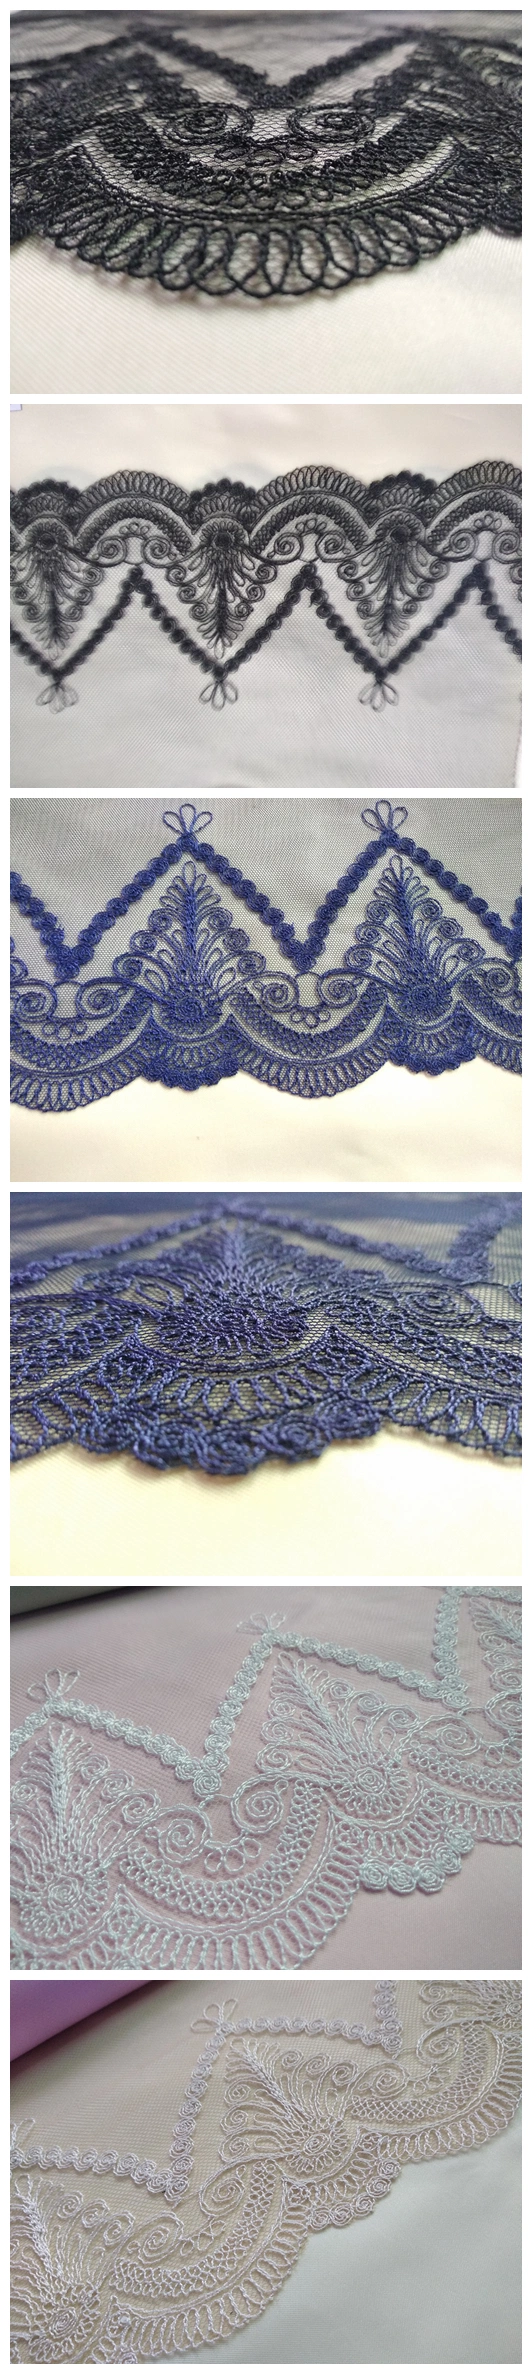 Winter Thick Dress Fabric Mess Embroidery Guipure Cotton Lace for Garment Accessories